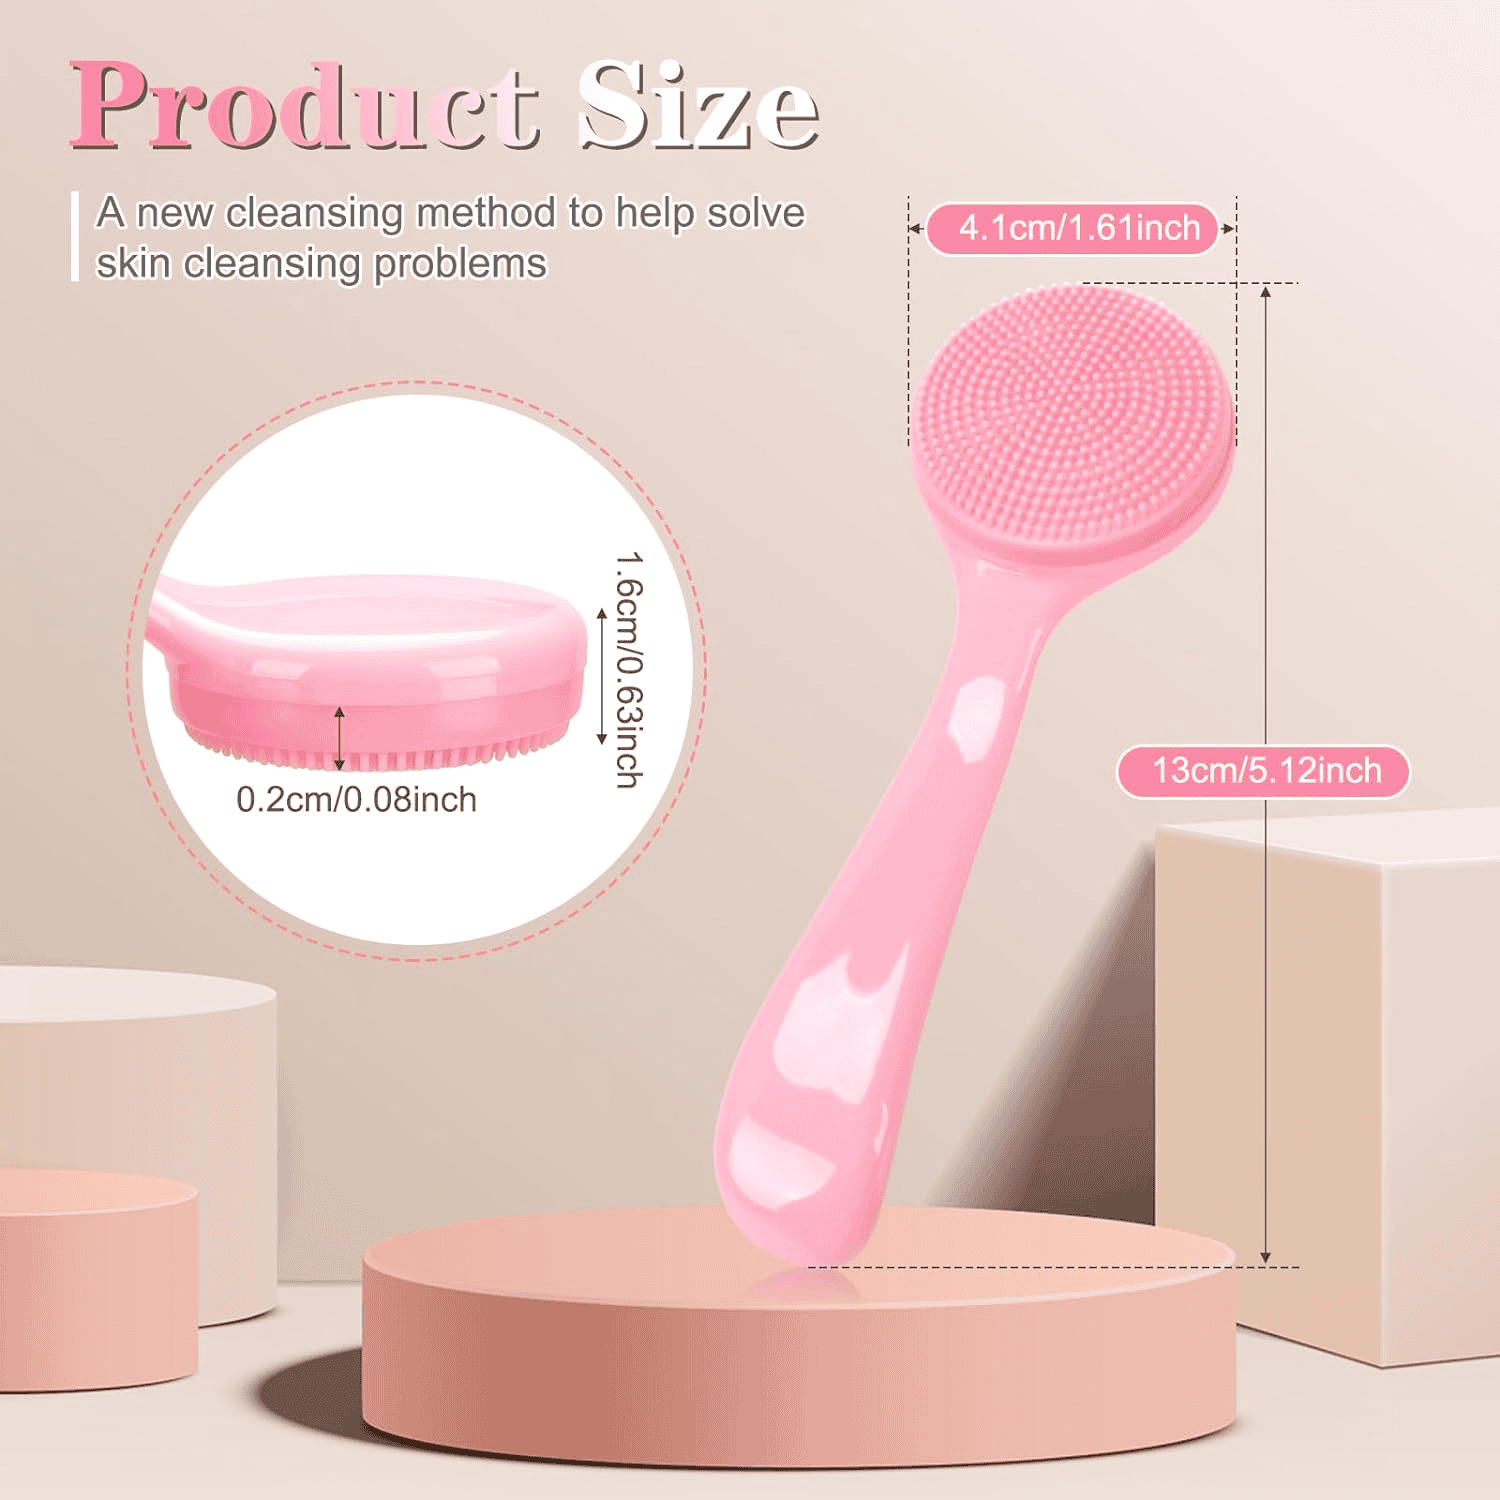 Silicon Facial Cleansing Brush, Soft Face Massage Wash Brush, Exfoliator Face Wash Scrub Cleanser